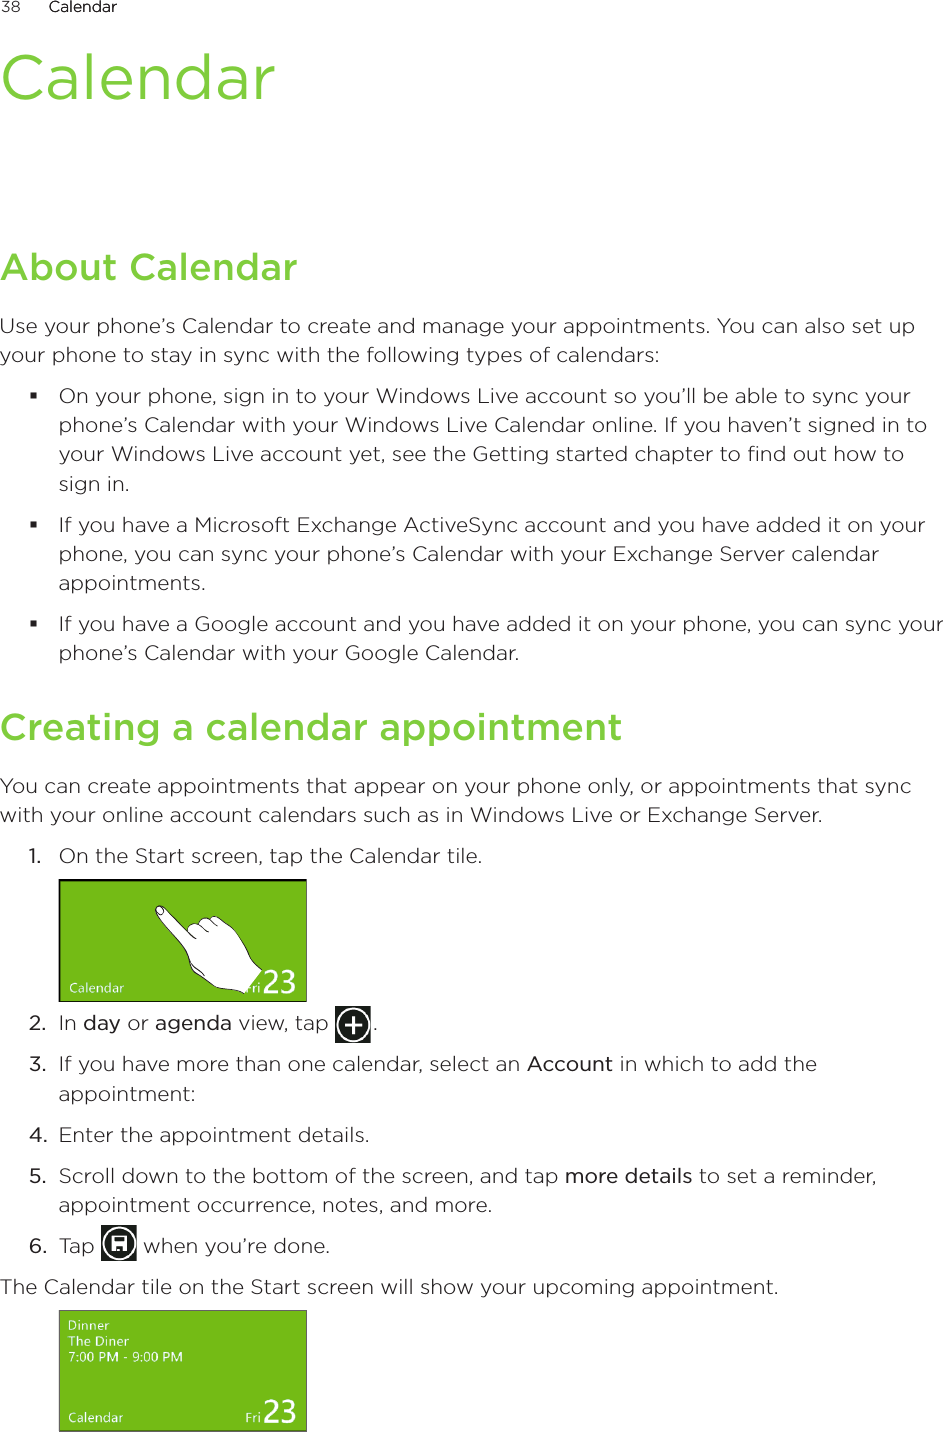 38      CalendarCalendar      CalendarAbout CalendarUse your phone’s Calendar to create and manage your appointments. You can also set up your phone to stay in sync with the following types of calendars:On your phone, sign in to your Windows Live account so you’ll be able to sync your phone’s Calendar with your Windows Live Calendar online. If you haven’t signed in to your Windows Live account yet, see the Getting started chapter to find out how to sign in.If you have a Microsoft Exchange ActiveSync account and you have added it on your phone, you can sync your phone’s Calendar with your Exchange Server calendar appointments.If you have a Google account and you have added it on your phone, you can sync your phone’s Calendar with your Google Calendar. Creating a calendar appointmentYou can create appointments that appear on your phone only, or appointments that sync with your online account calendars such as in Windows Live or Exchange Server.1.  On the Start screen, tap the Calendar tile.2.  In day or agenda view, tap   .3.  If you have more than one calendar, select an Account in which to add the appointment:4.  Enter the appointment details.5.  Scroll down to the bottom of the screen, and tap more details to set a reminder, appointment occurrence, notes, and more.6.  Tap   when you’re done.The Calendar tile on the Start screen will show your upcoming appointment.